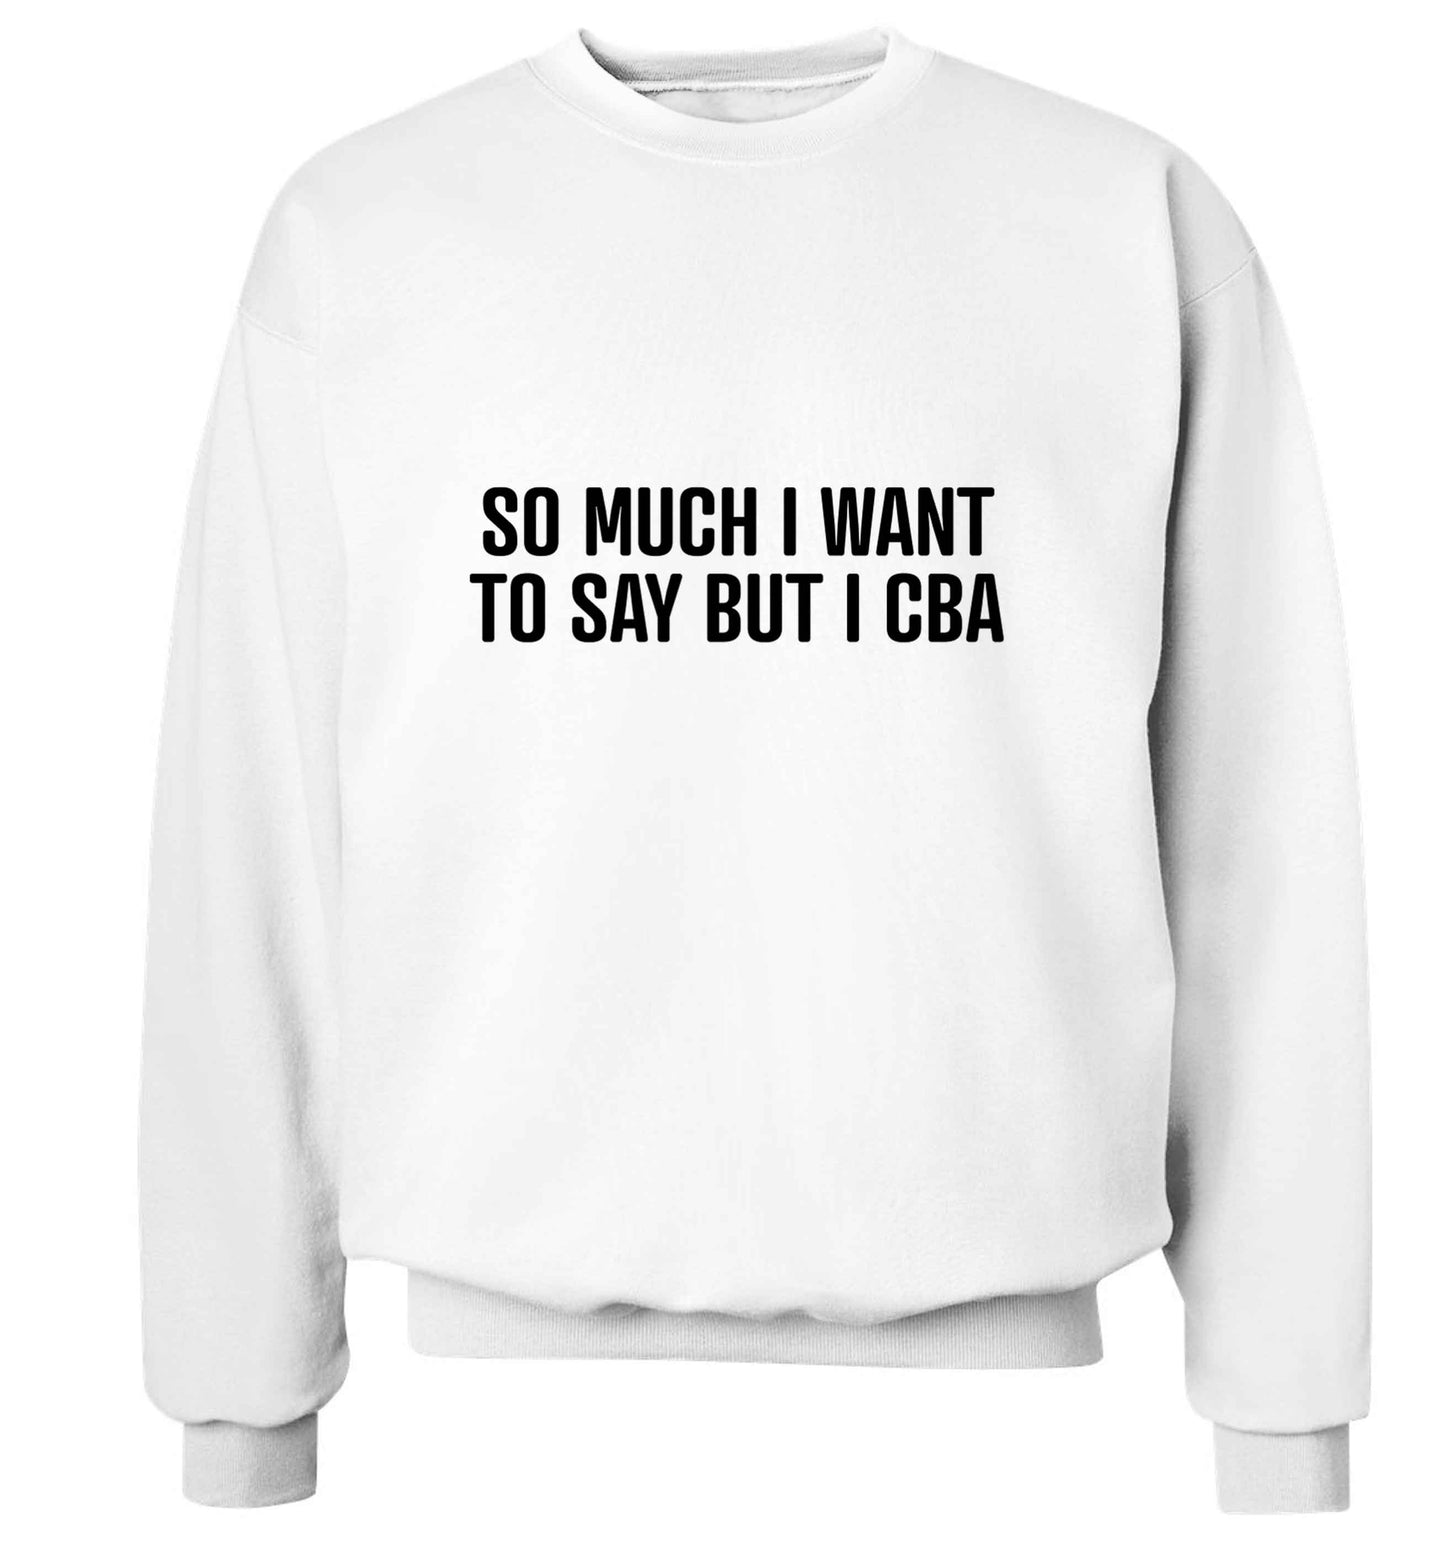 So much I want to say I cba  adult's unisex white sweater 2XL